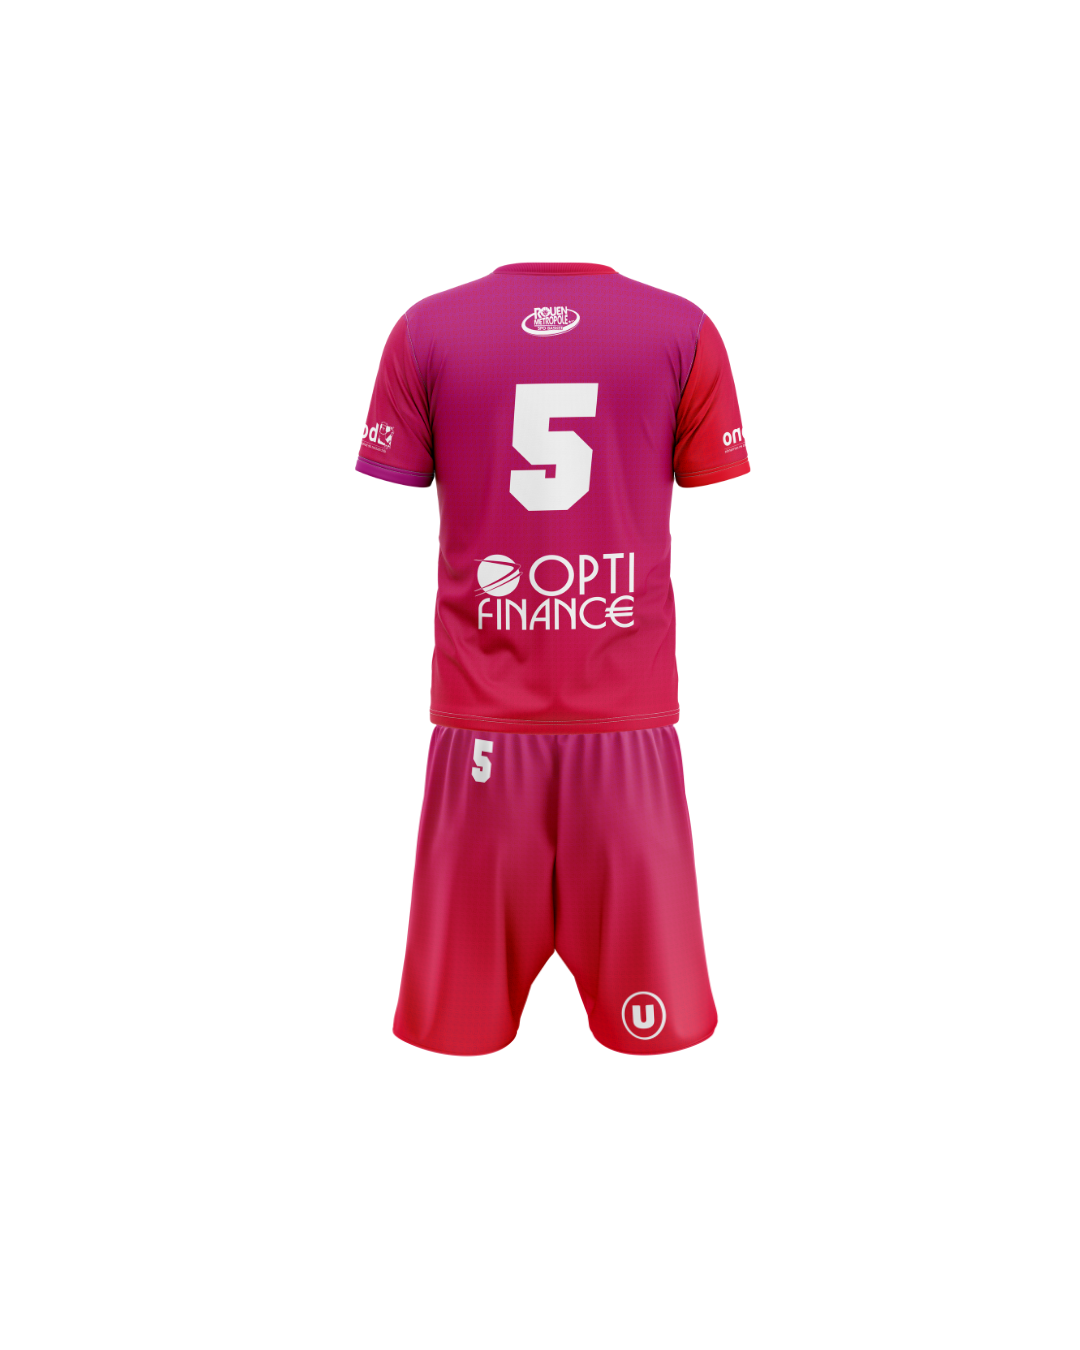 https://www.rouenmetrobasket.com/wp-content/uploads/2021/11/ANNONCE-MAILLOT-FERRE-2.png